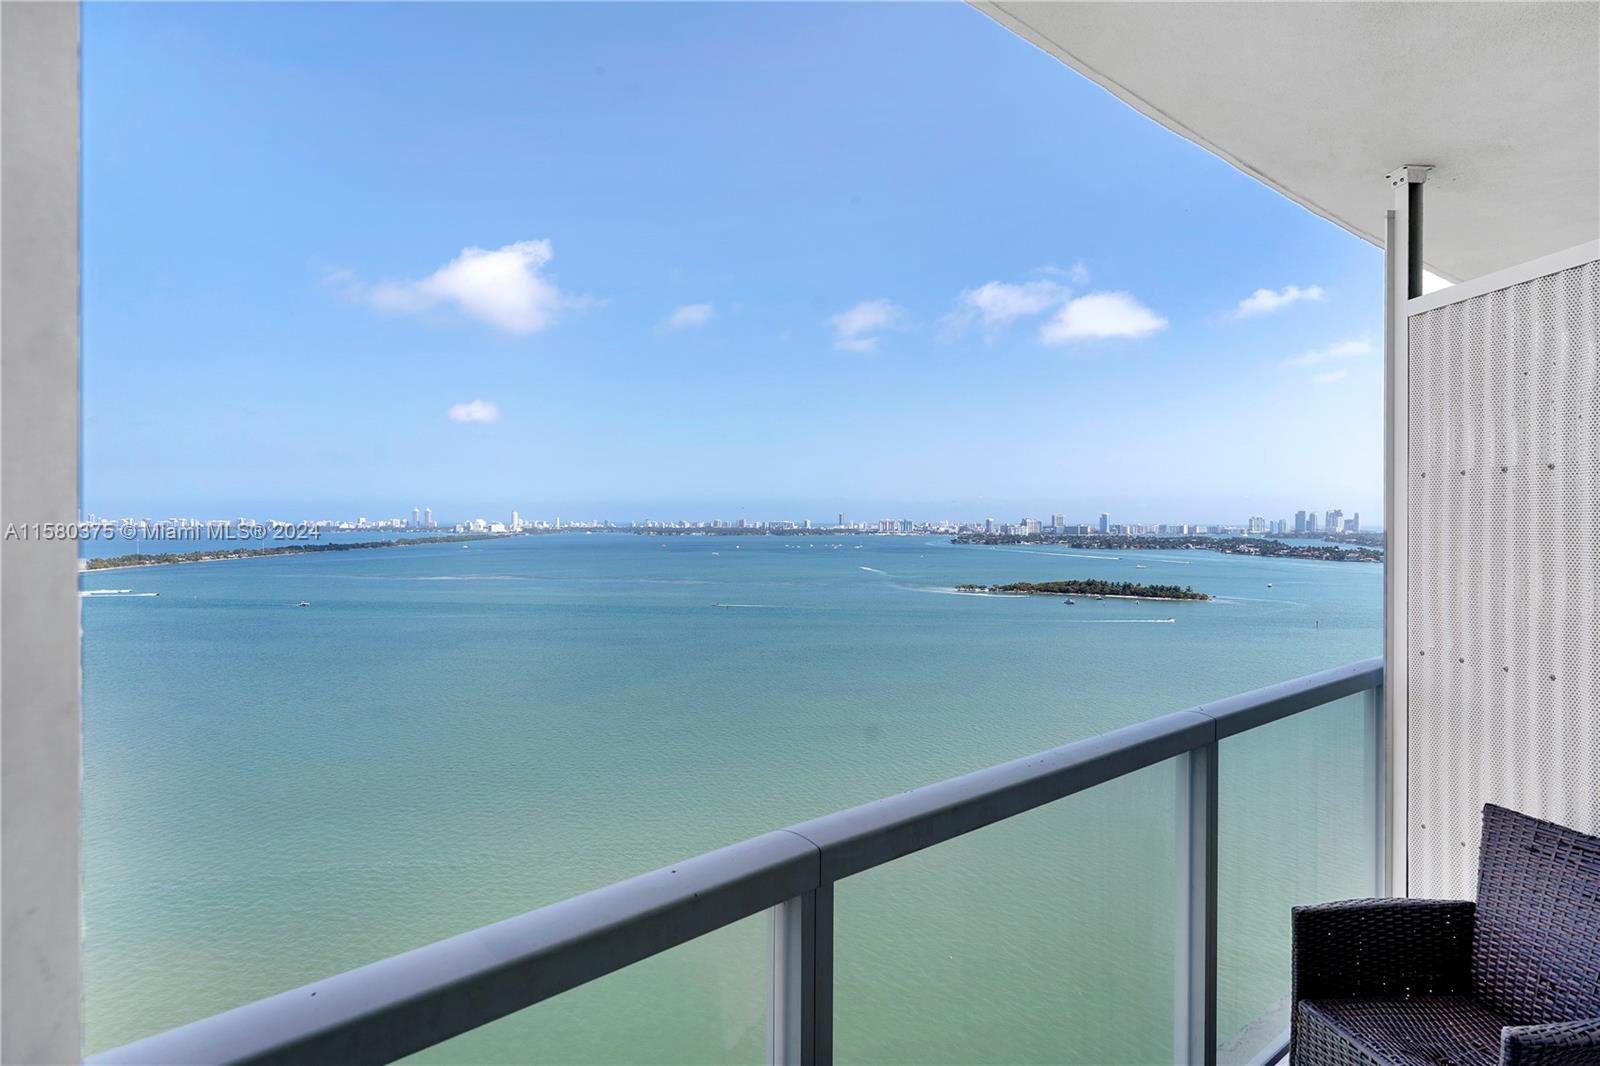 Bright bayfront condominium with beautiful, unobstructed views of the Intracoastal and Miami Beach.  Split floorplan with two spacious bedrooms (both with en-suite bath) plus half bath. Separate balconies for master bedroom and living room. Kitchen is open to dining and living room areas. Hurricane impact glass. Onyx on the Bay is a bayfront building with generous amenities, including well-equipped gym with sauna and steam rooms, bayside pool, hot tub. Sunset garden and dog walk area on 8th floor. BBQ. Party room with large TV. Billiard room with sports bar at lobby level. One assigned, covered parking space. Complimentary visitor parking. No valet. Short drive to Wynwood, Design District, Miami Beach, downtown Miami. Seller has paid the assessment. SEE VIRTUAL TOUR VIDEO.